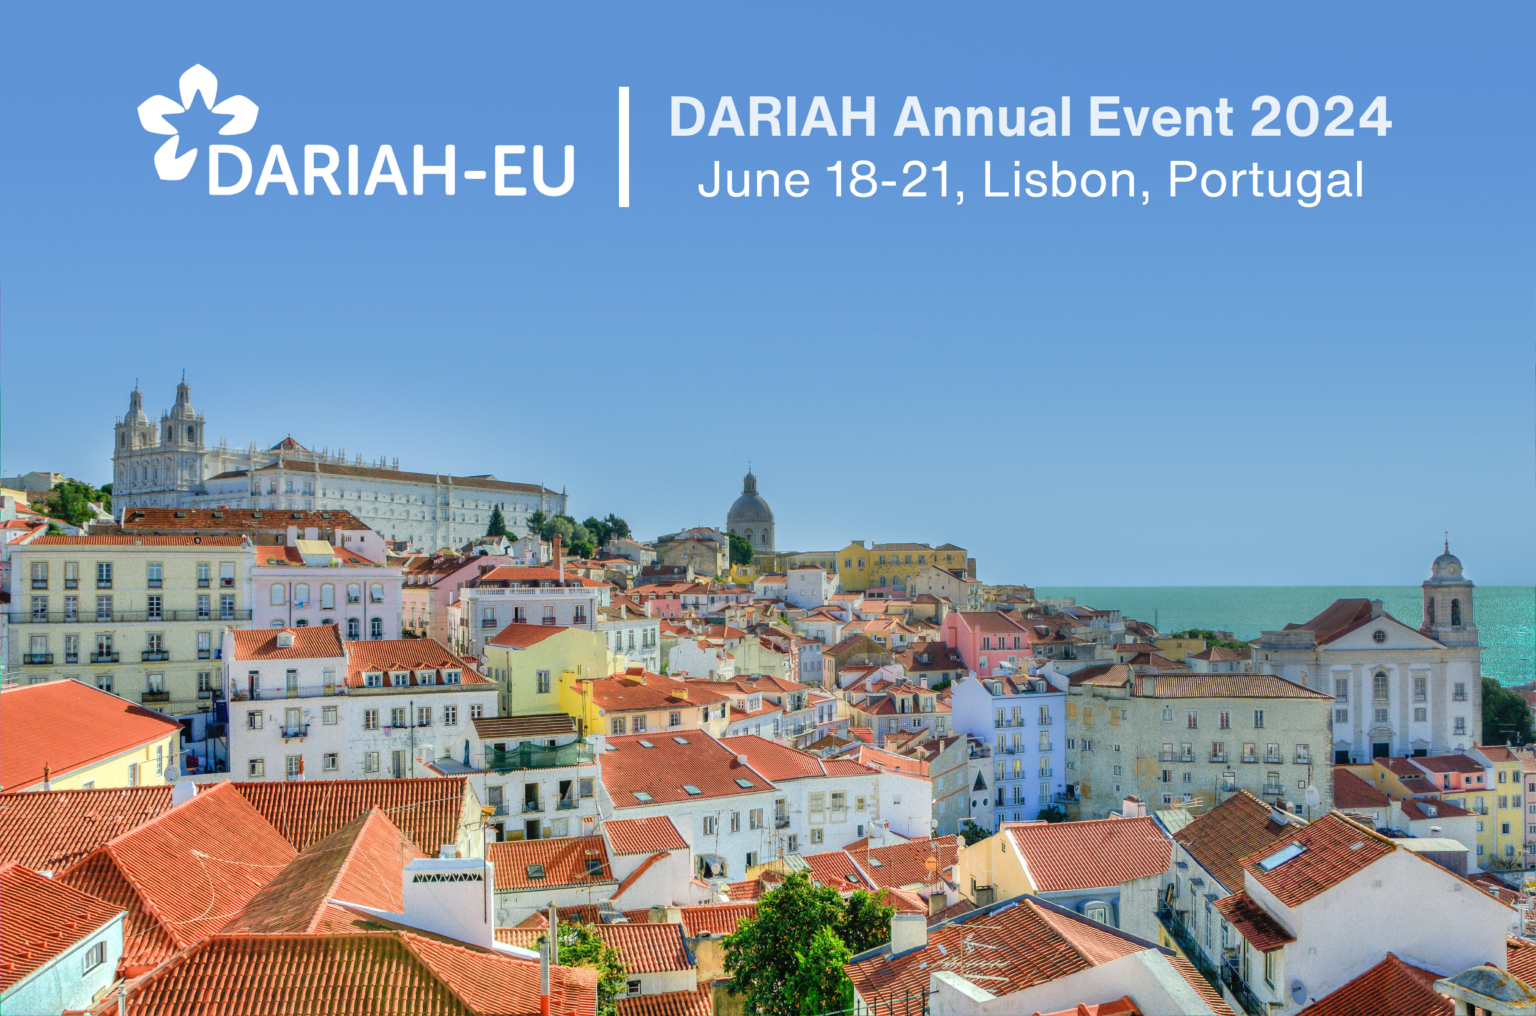 Skyline of Lisbon with the text "DARIAH Annual Event 2024 | June 18-21, Lisbon, Portugal"